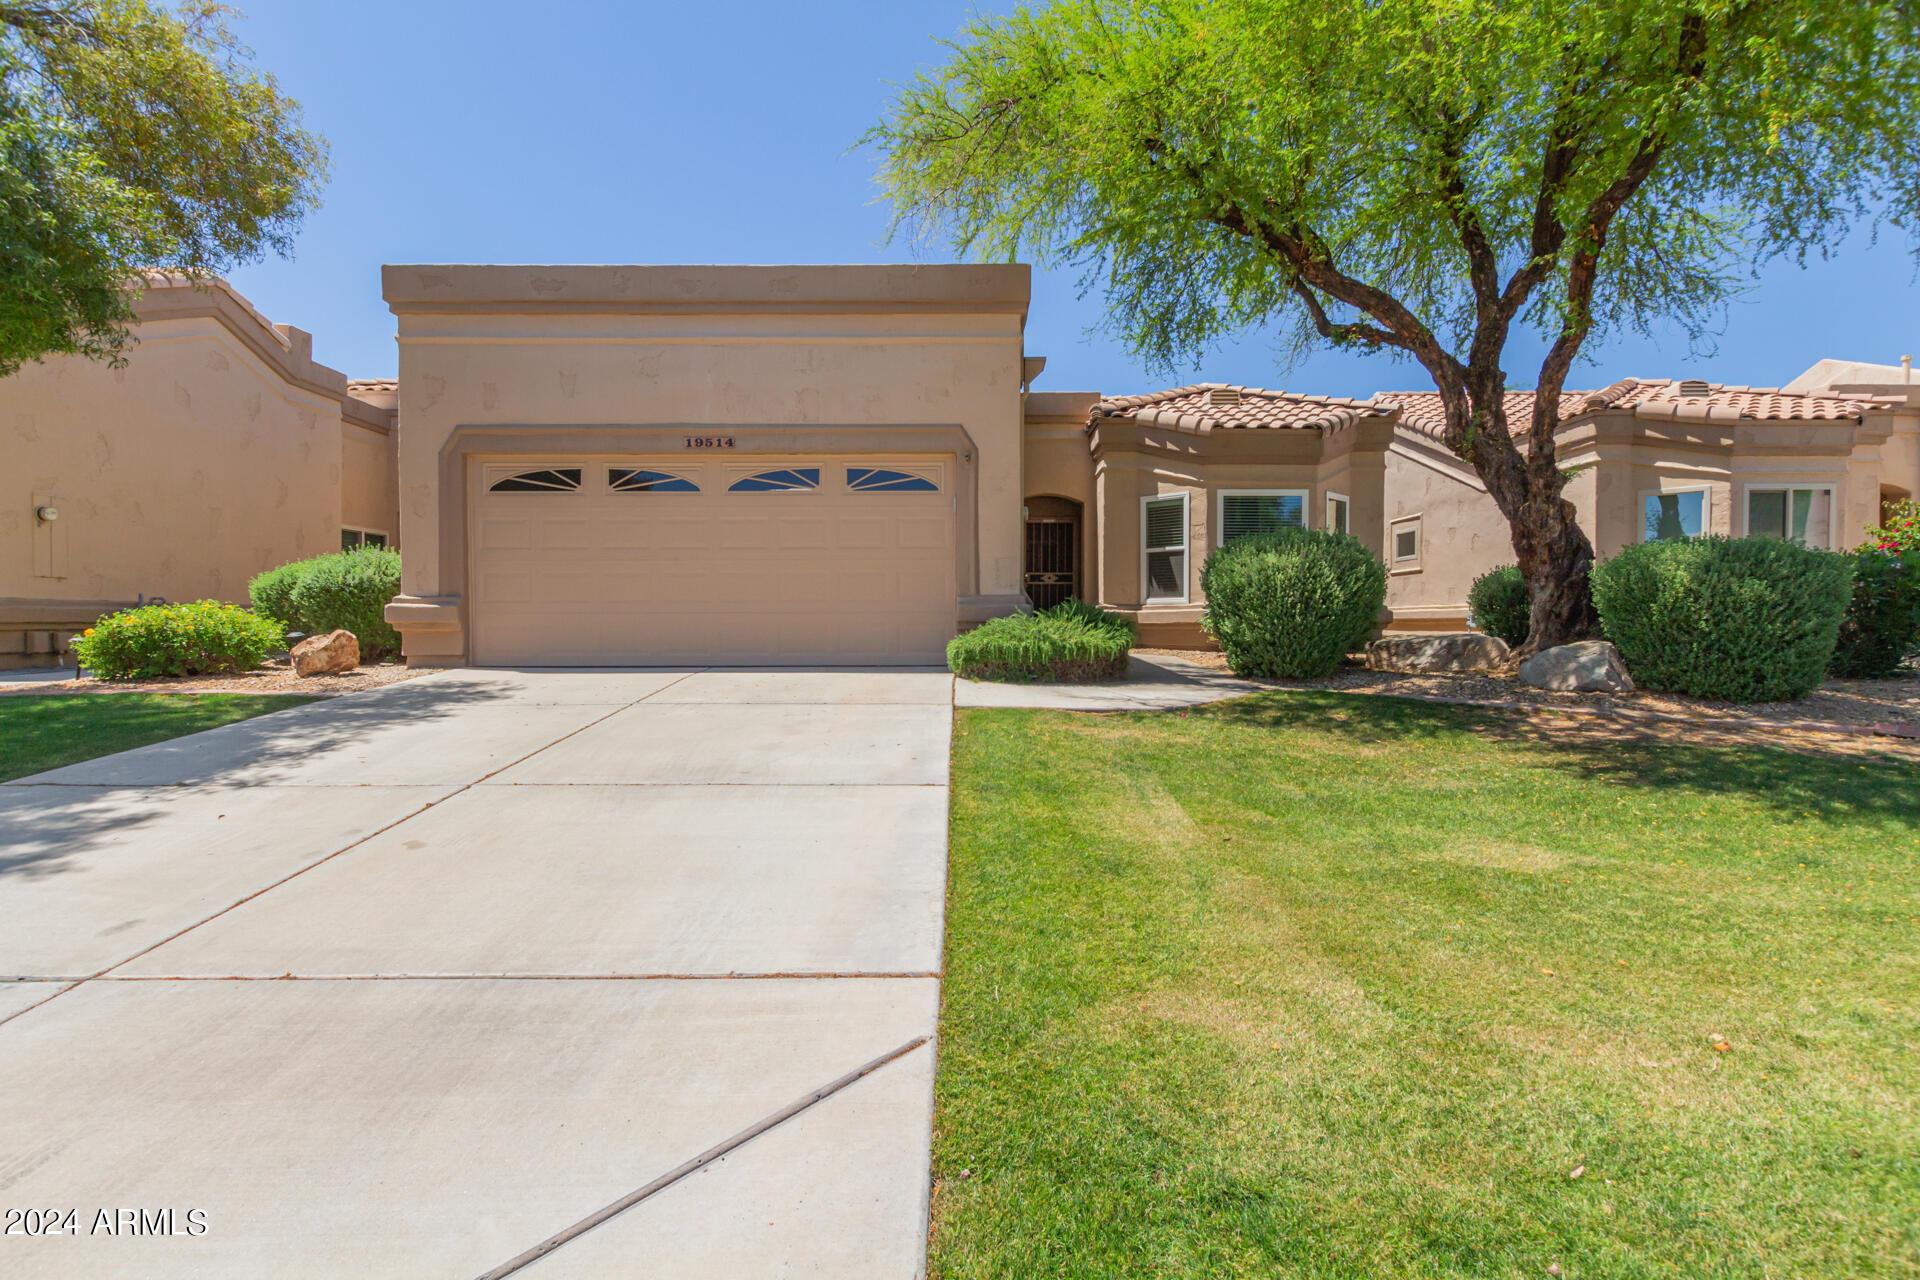 Photo one of 19514 N 84Th Ave Peoria AZ 85382 | MLS 6694726